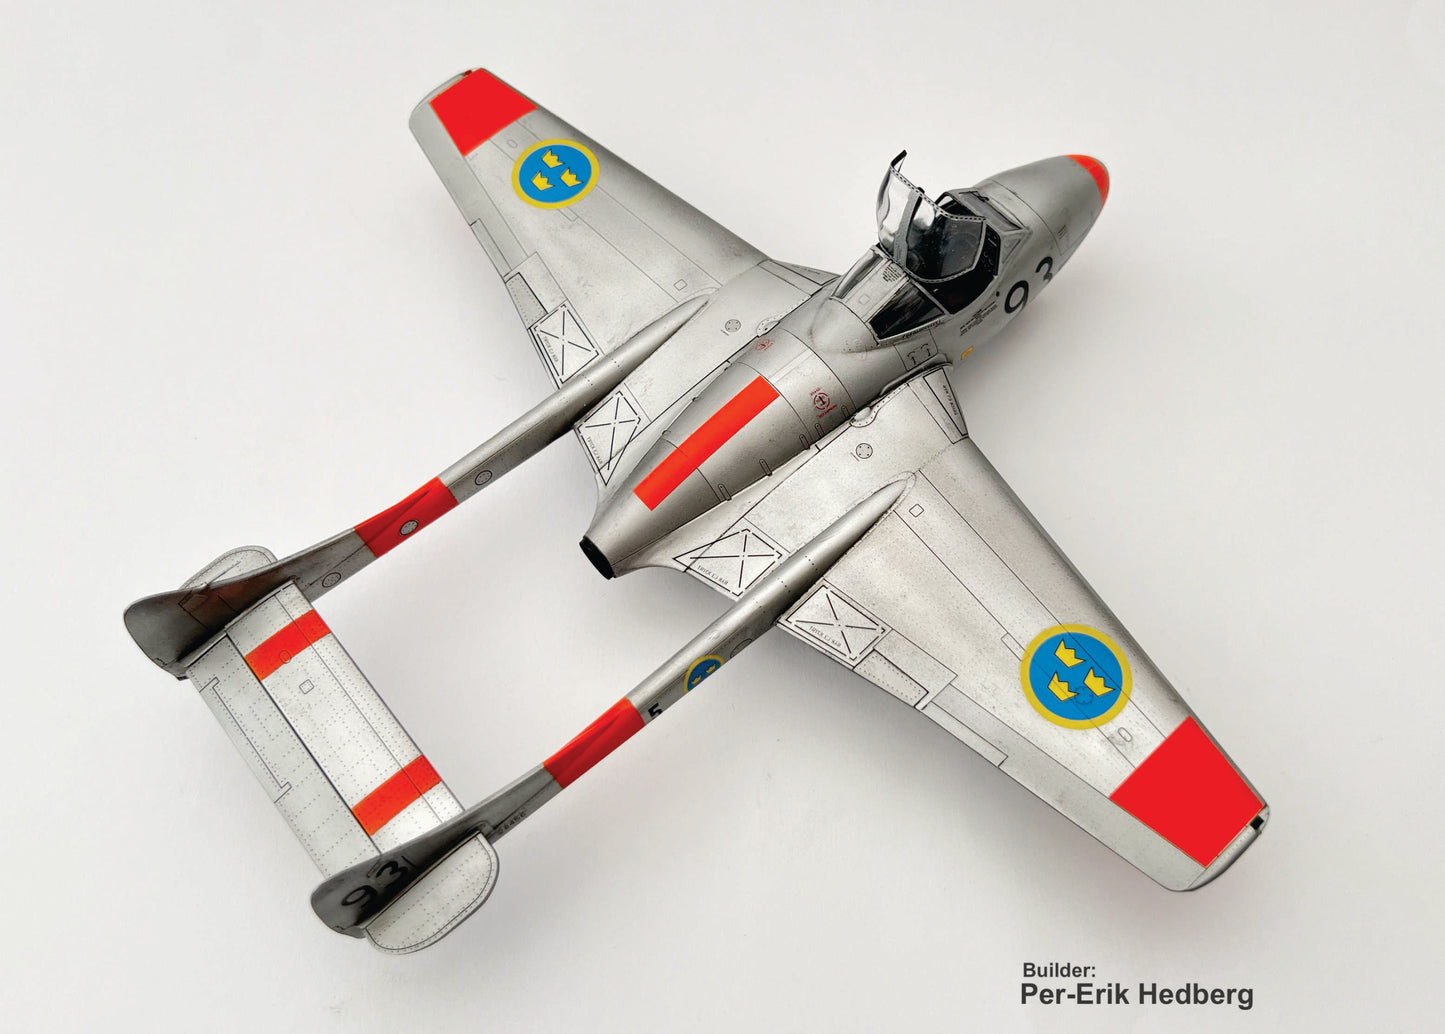 J28 C Vampire in Swedish Air Force, 1/48 scale. 48A006